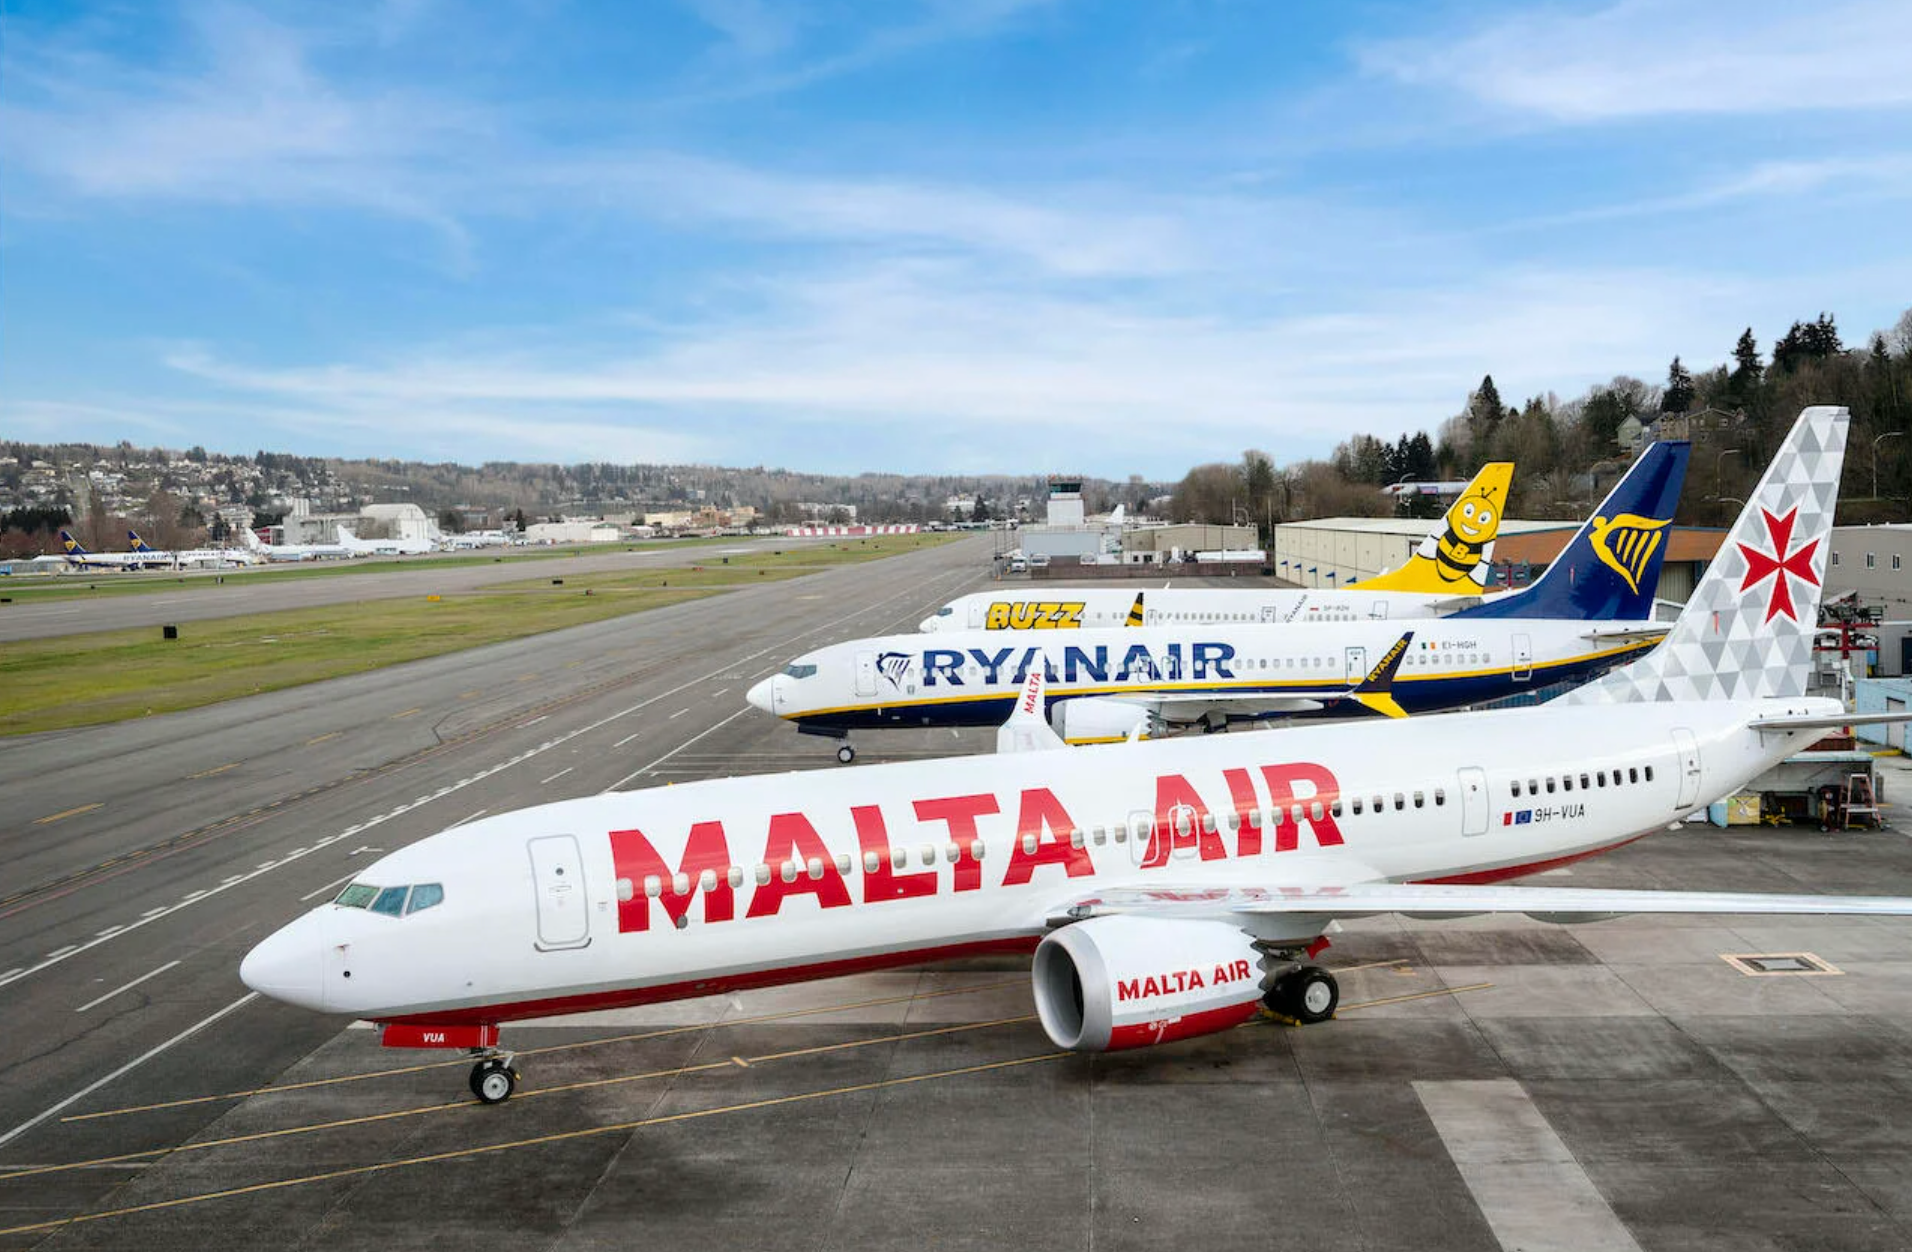 Malta Air, Ryanair, and Buzz Boeing 737 Max 8-200s parked side by side.